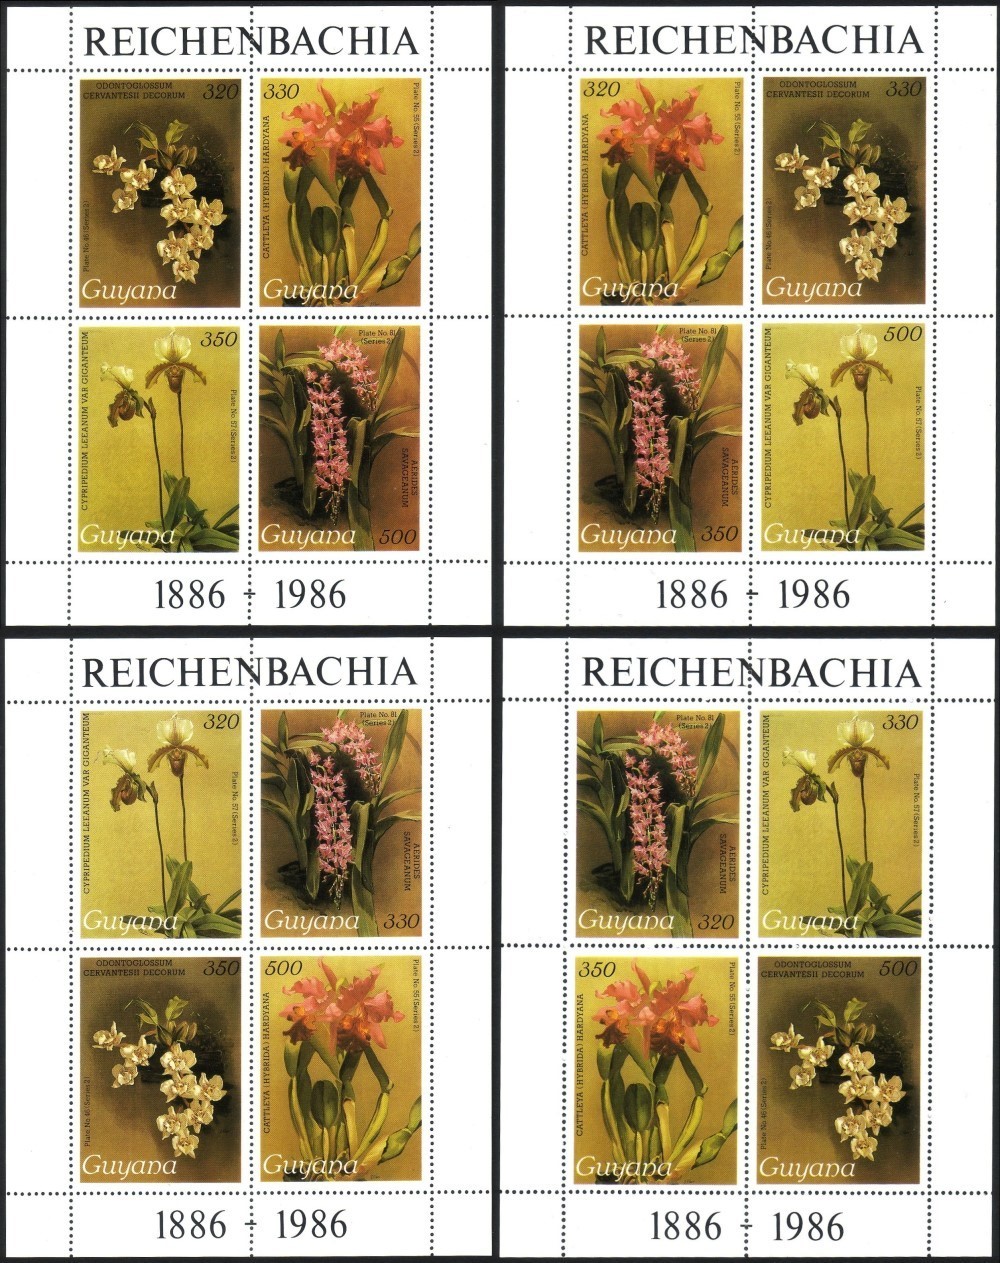 1988 Centenary of Publication of Sanders' Reichenbachia Orchids (27th issue) Stamps